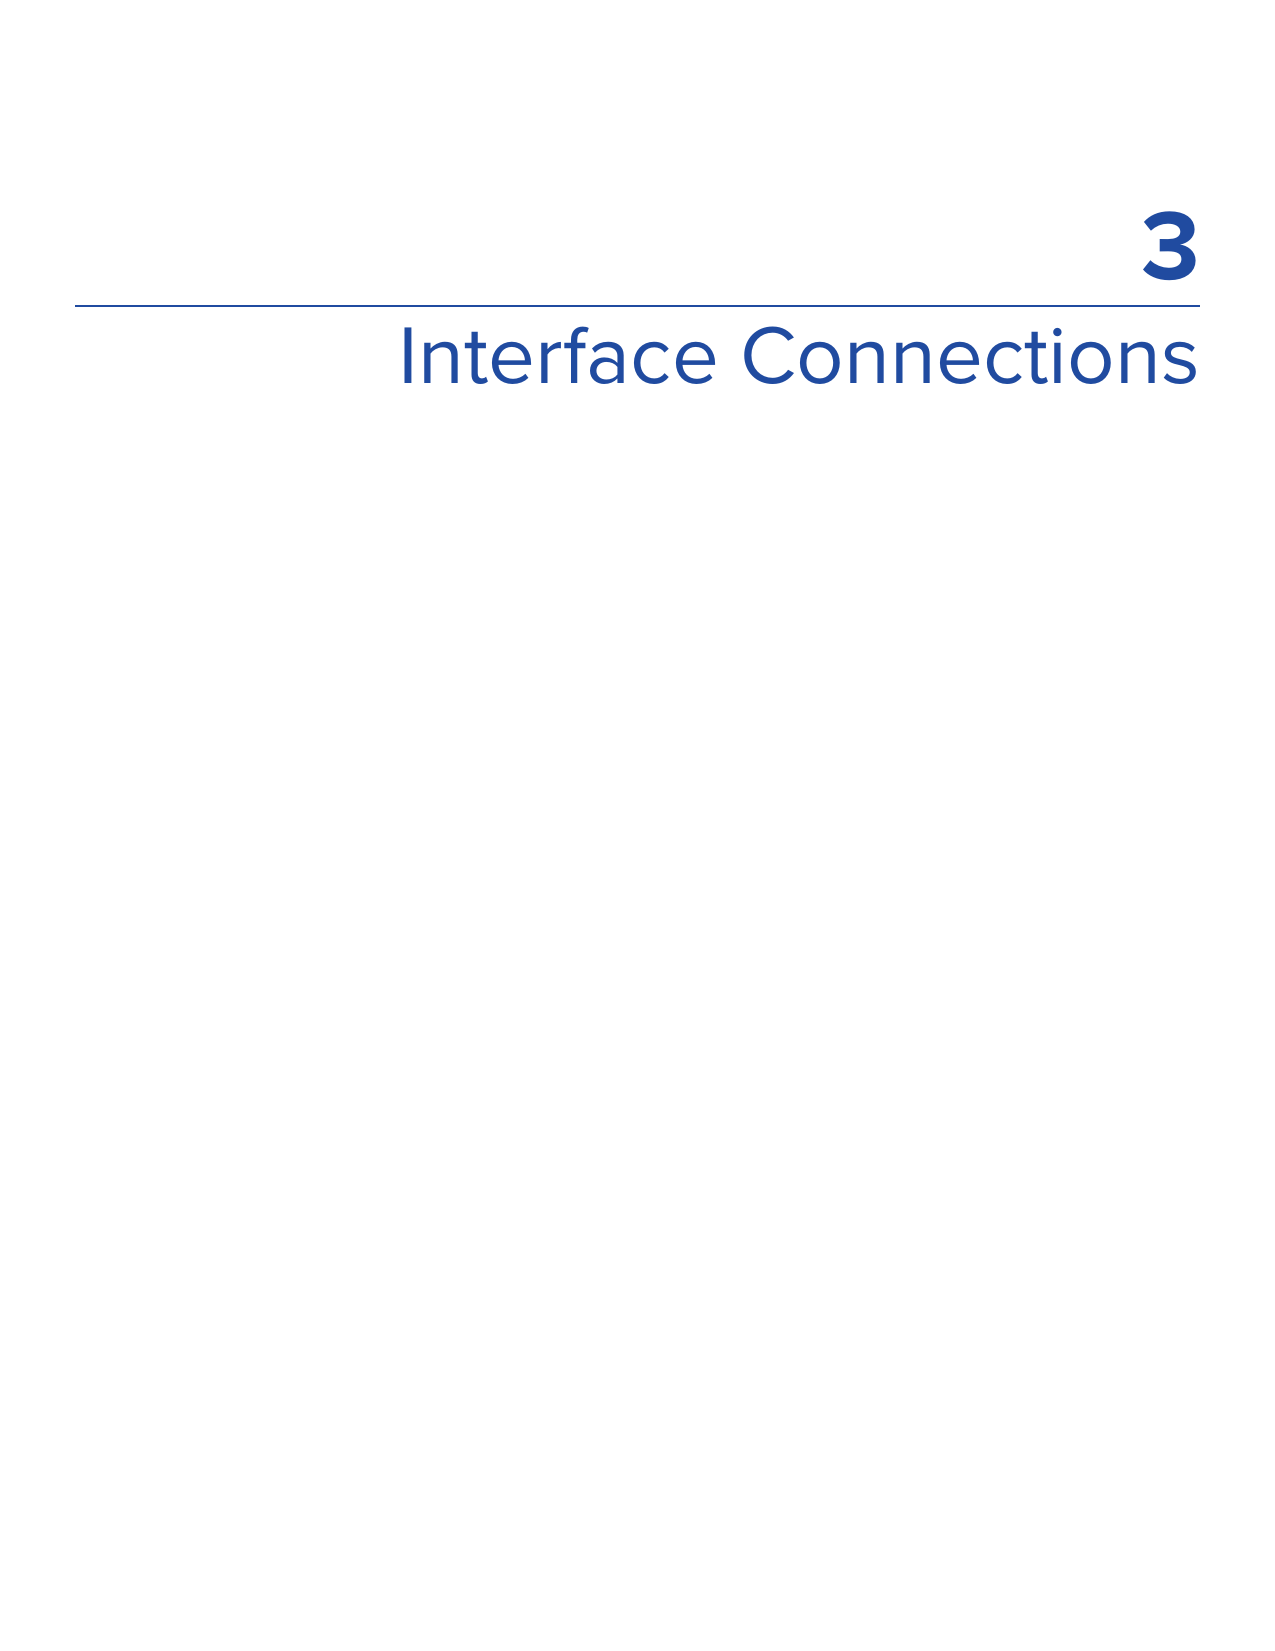 3Interface Connections